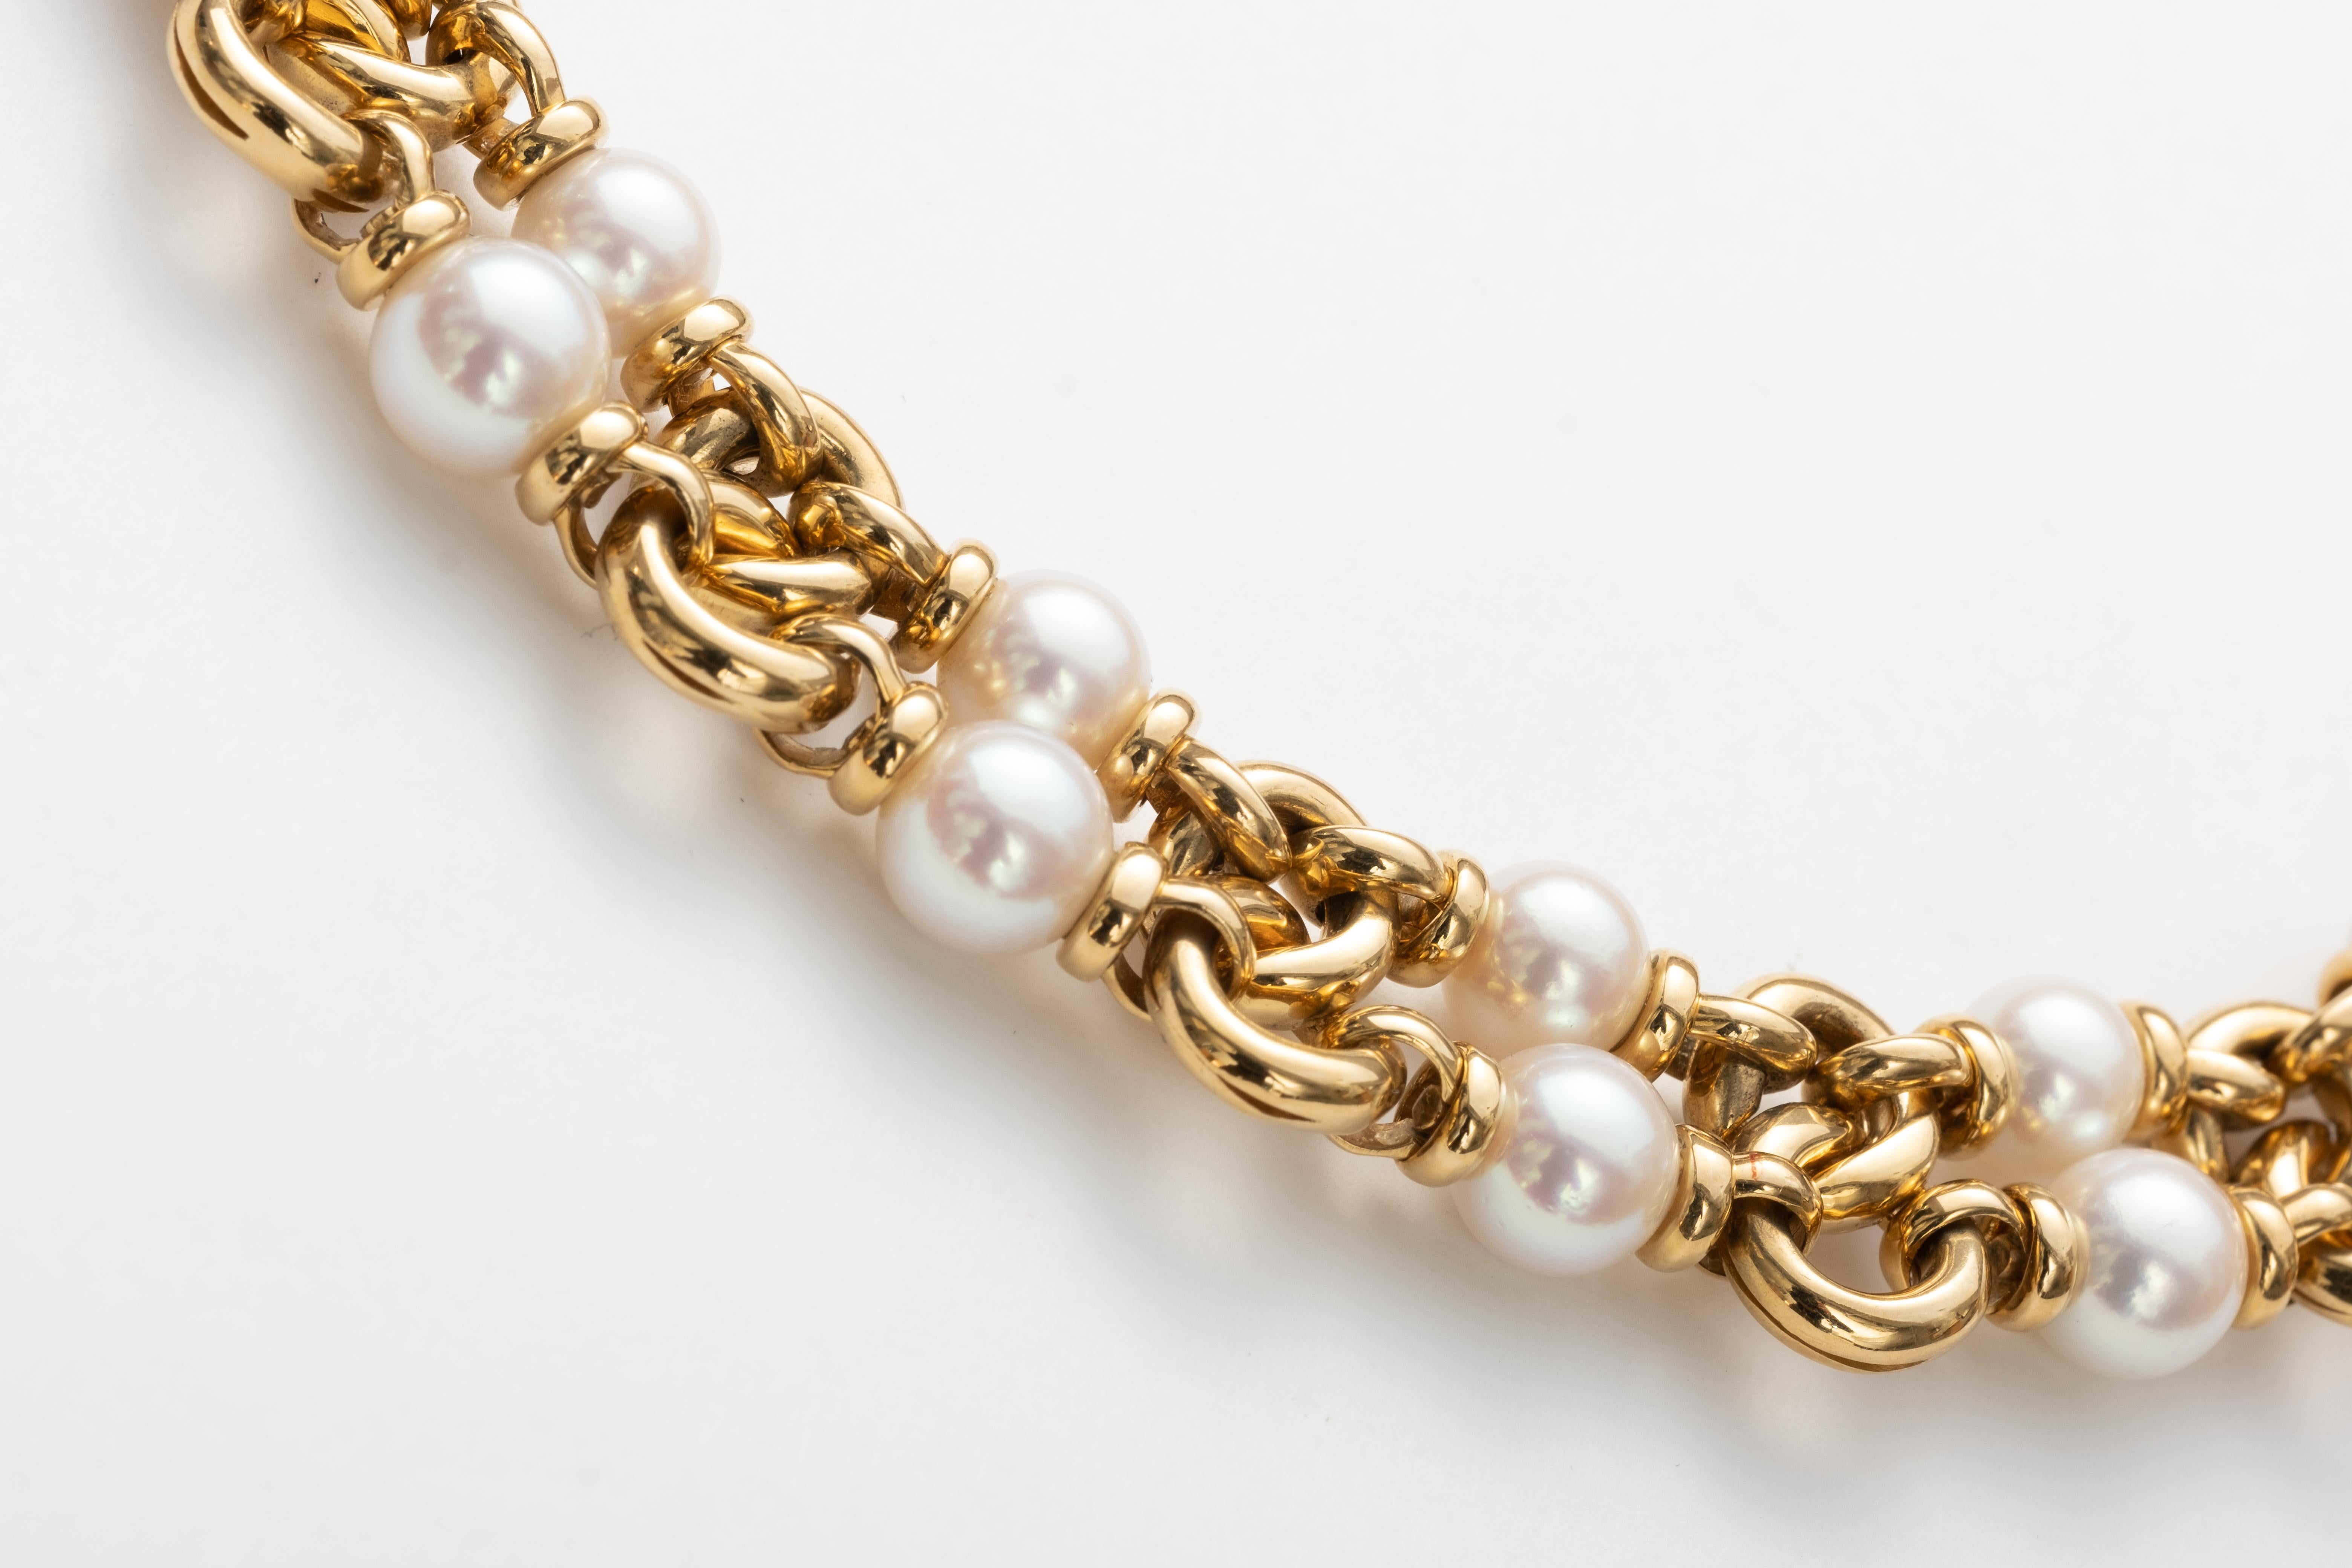 Bvlgari signed 18k Gold and Pearl Necklace. Weighs 73.25 dwt and measures 15.25